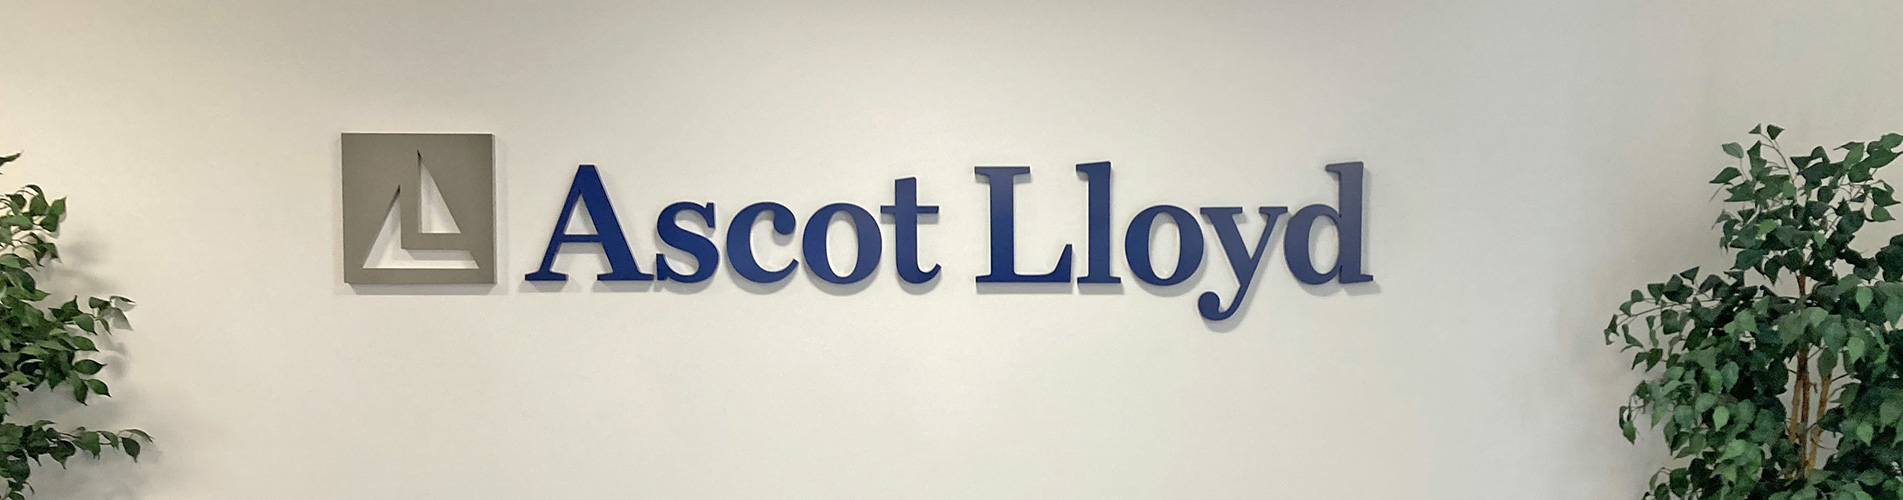 Ascot Lloyd Conflicts of Interest policy statement